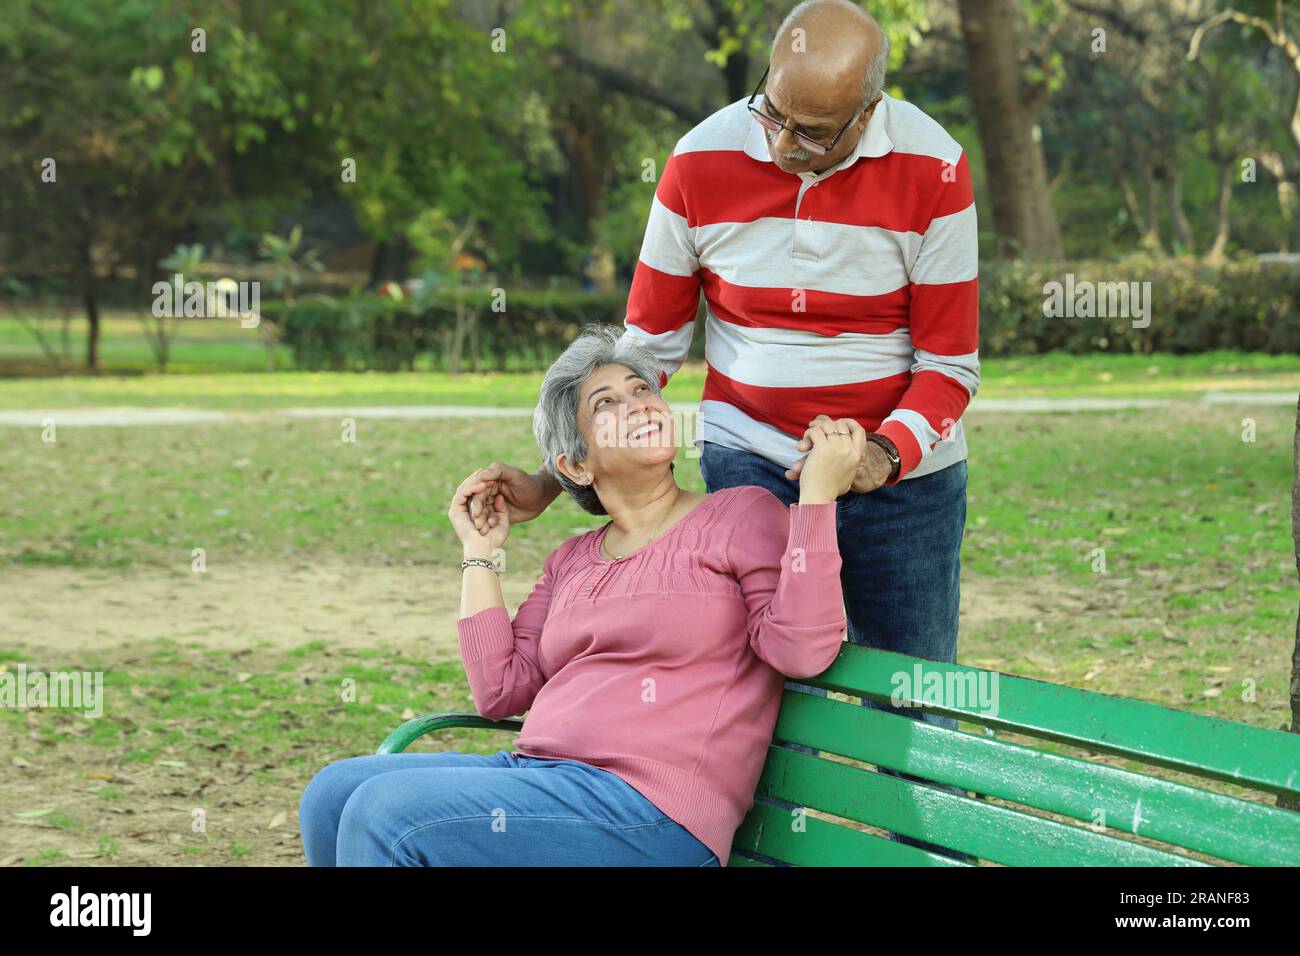 Old age couple sitting on the bench in a lush green serene environment having a good time together. They are happily enjoying their time. Stock Photo